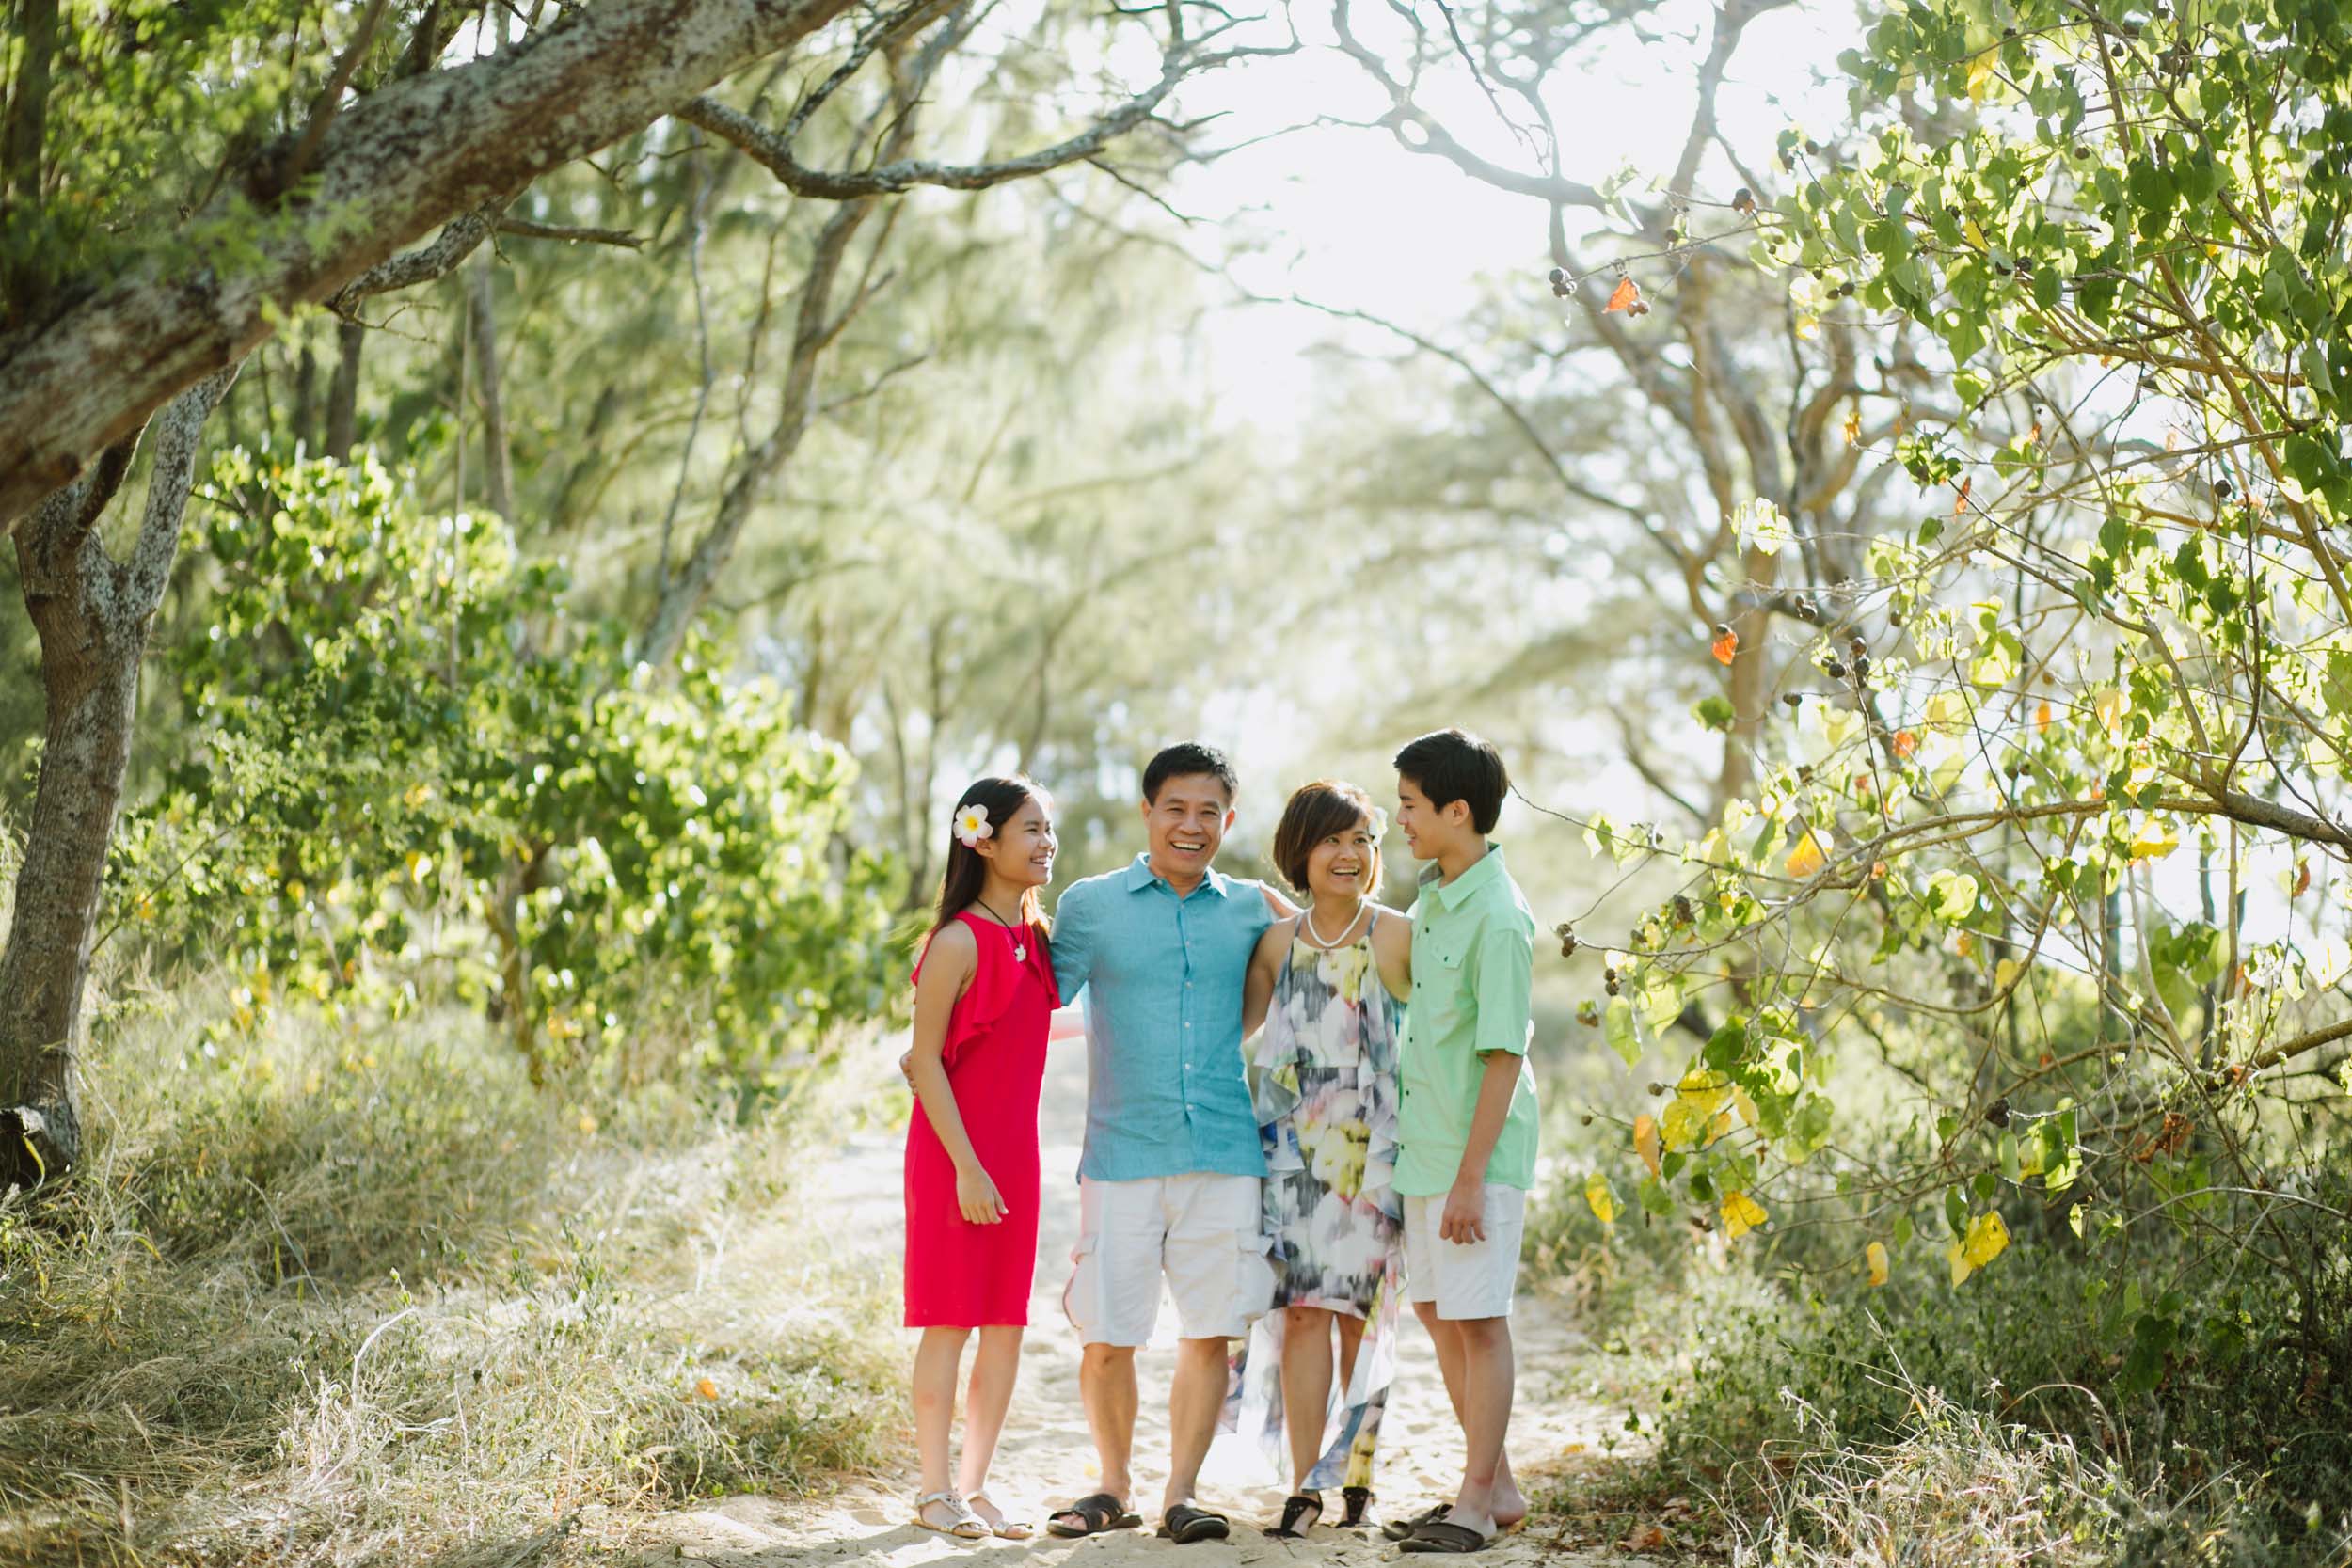 Family standing together along a sandy pathway surrounded by bright green foliage in Maui, USA